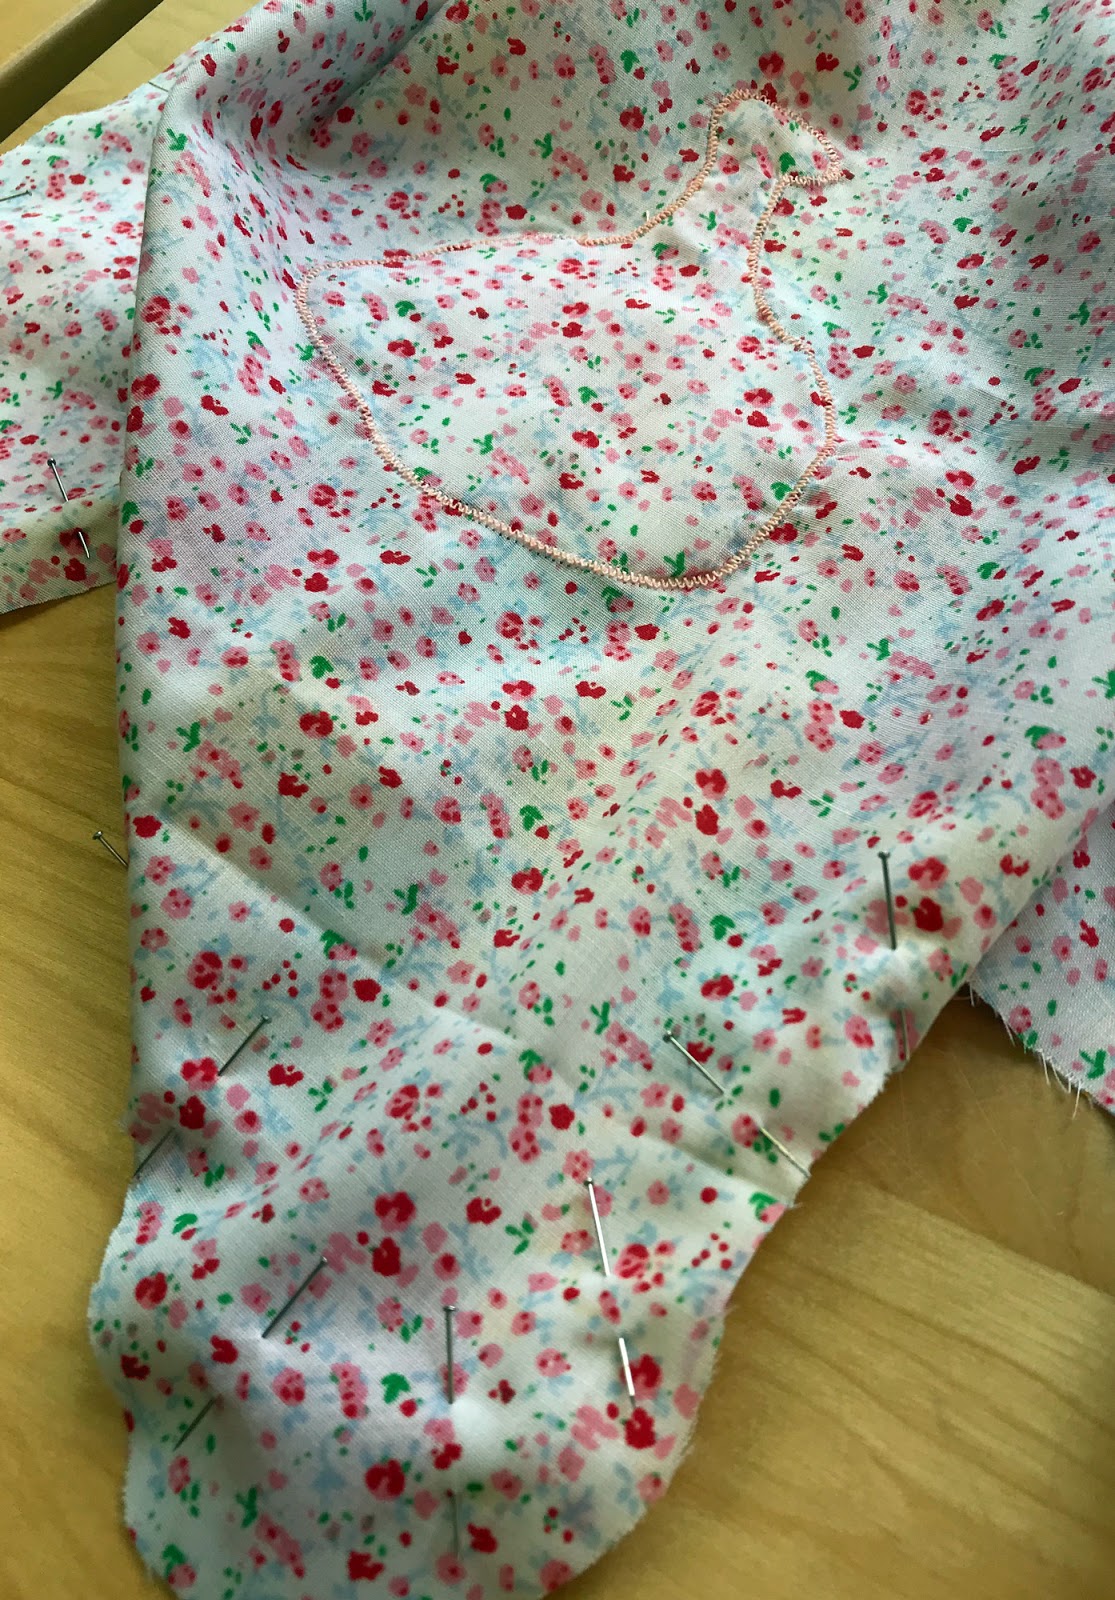 New Grandma Wants to Sew!: Baby girls' crossover jumper / apron